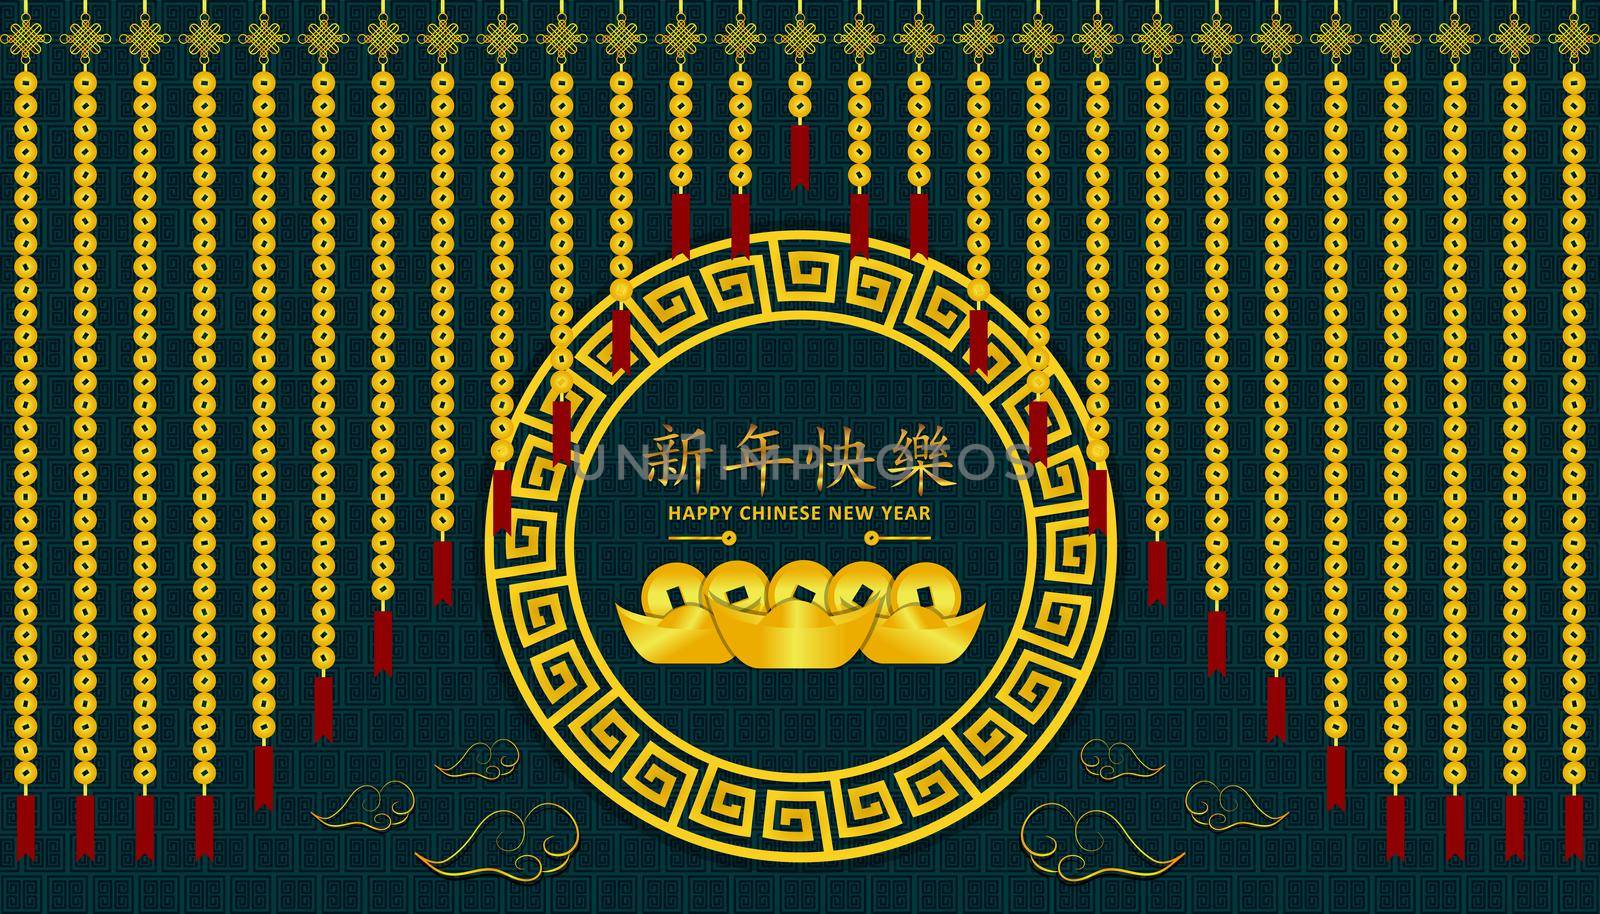 Happy Chinese New Year.  curtain gold money around center circle with "Xin Nian Kual Le" is character for congratulatory CNY festival. inside. pattern background. asian holiday.